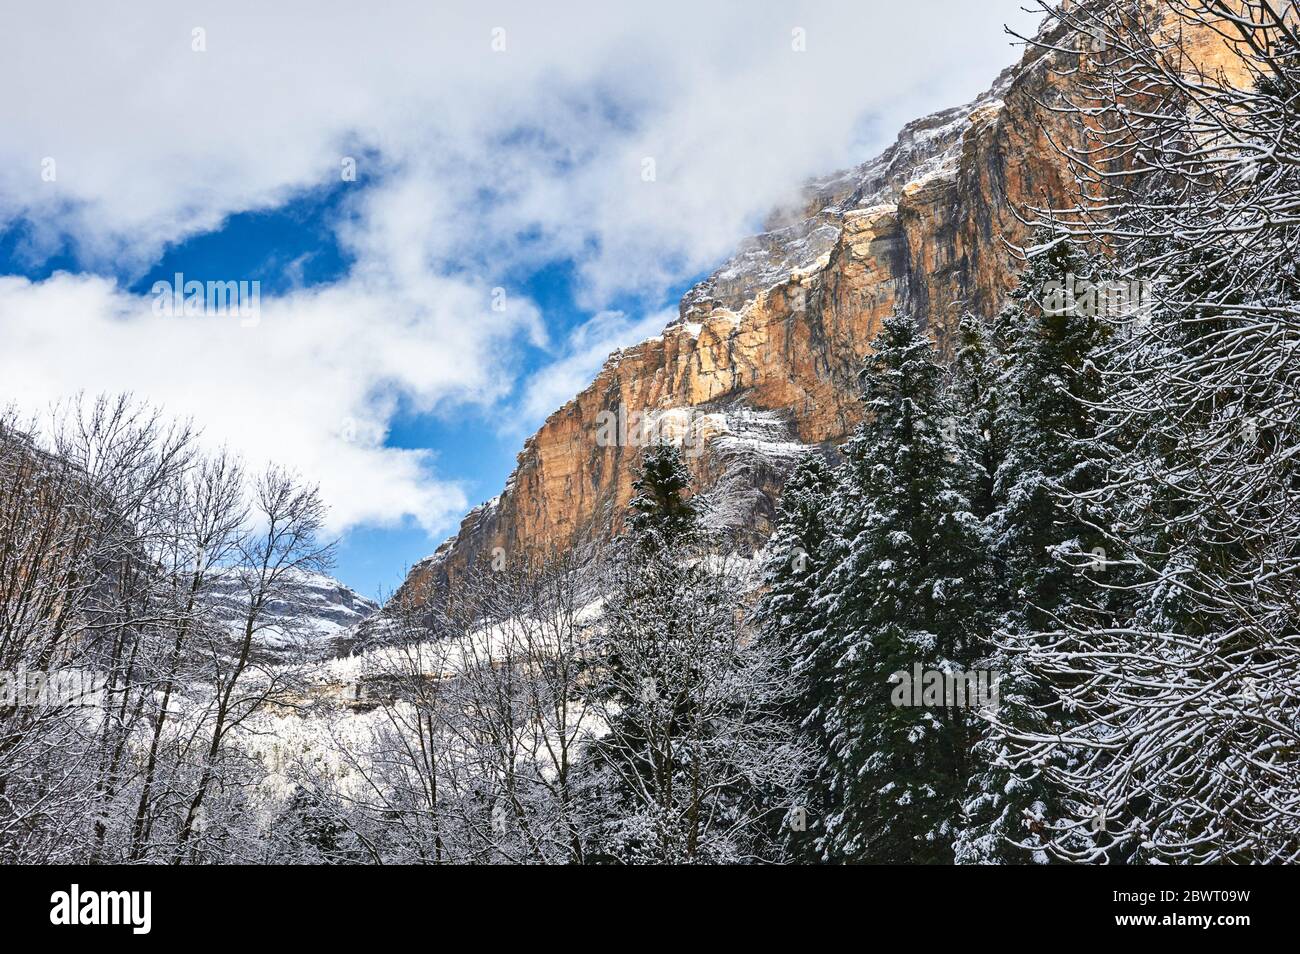 Pyrenees: Snowy alpine landscape in the National park of Ordesa and Monte Perdido (Huesca province, Aragon region, Spain) Stock Photo